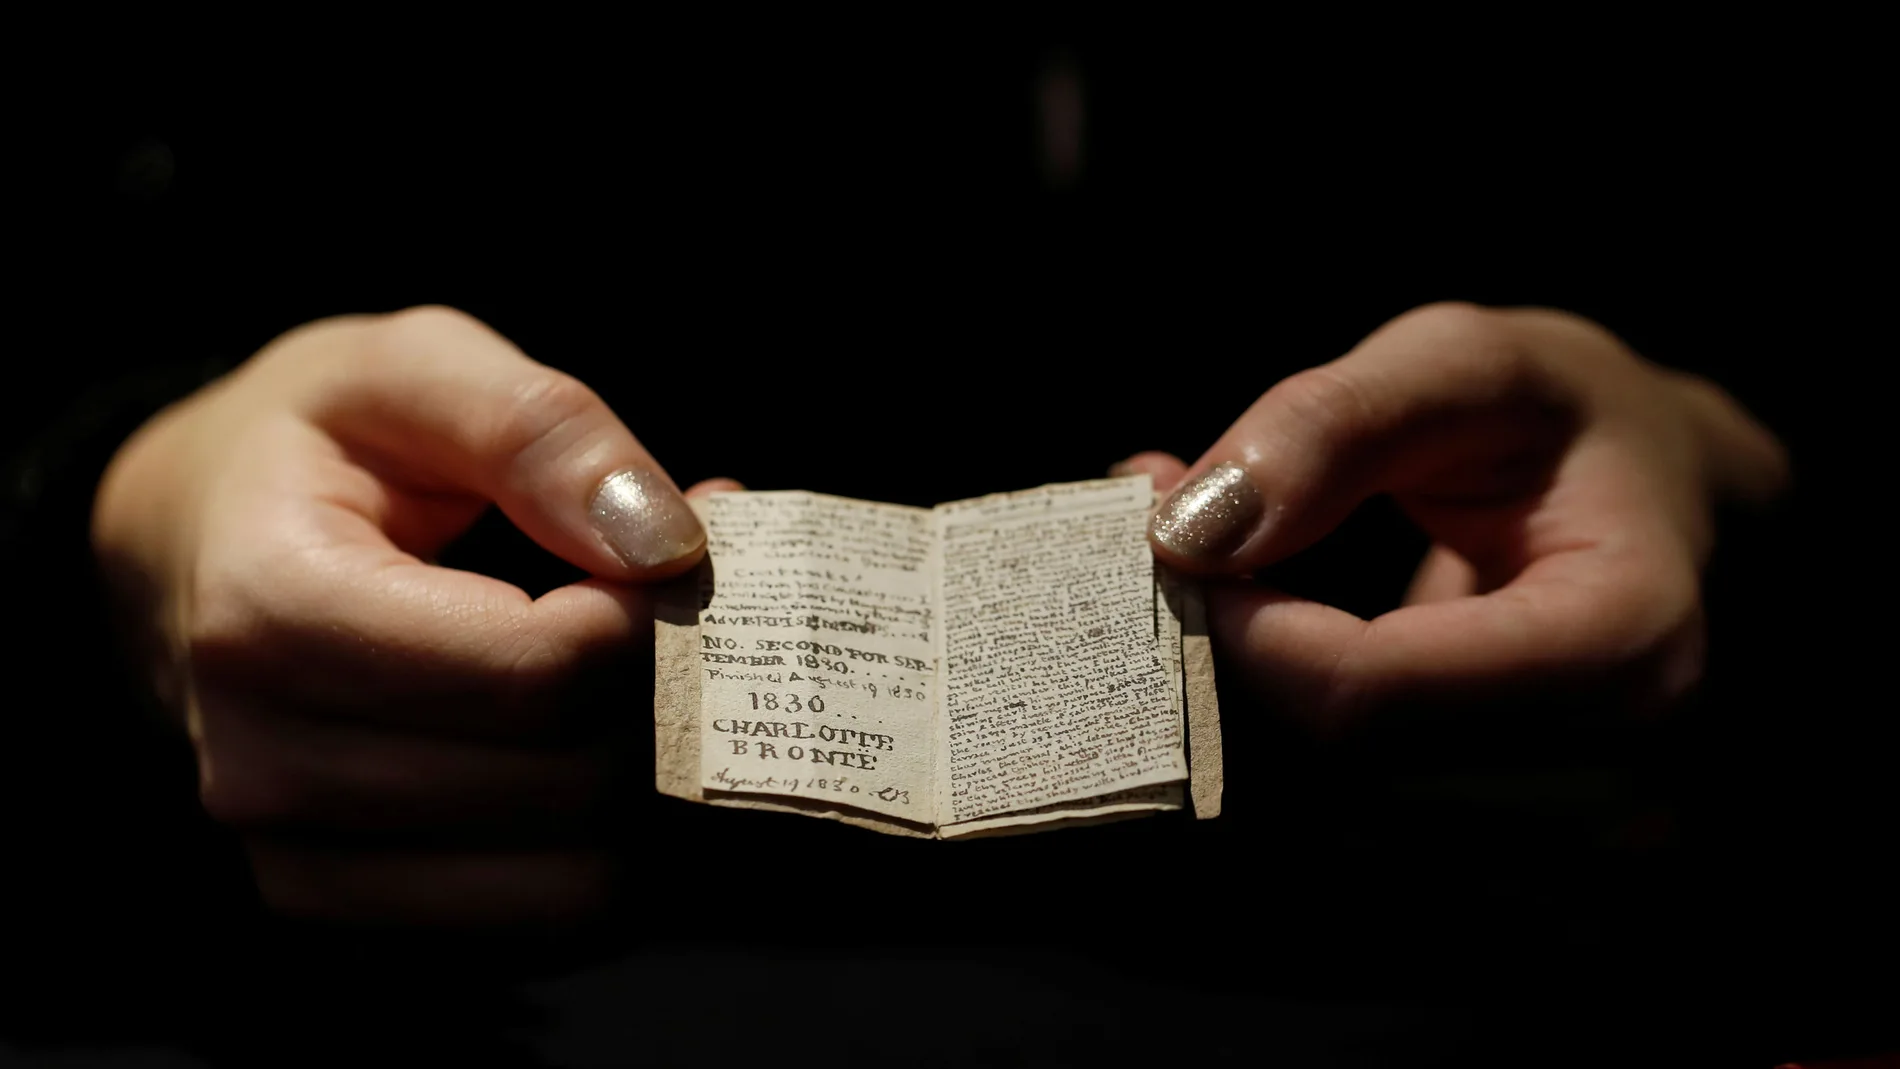 An employee displays the second issue of Young Men's Magazine, a miniature manuscript dated 1830, written by Charlotte Bronte when she was 14 years old, before being put on auction at Drouot auction house in Paris